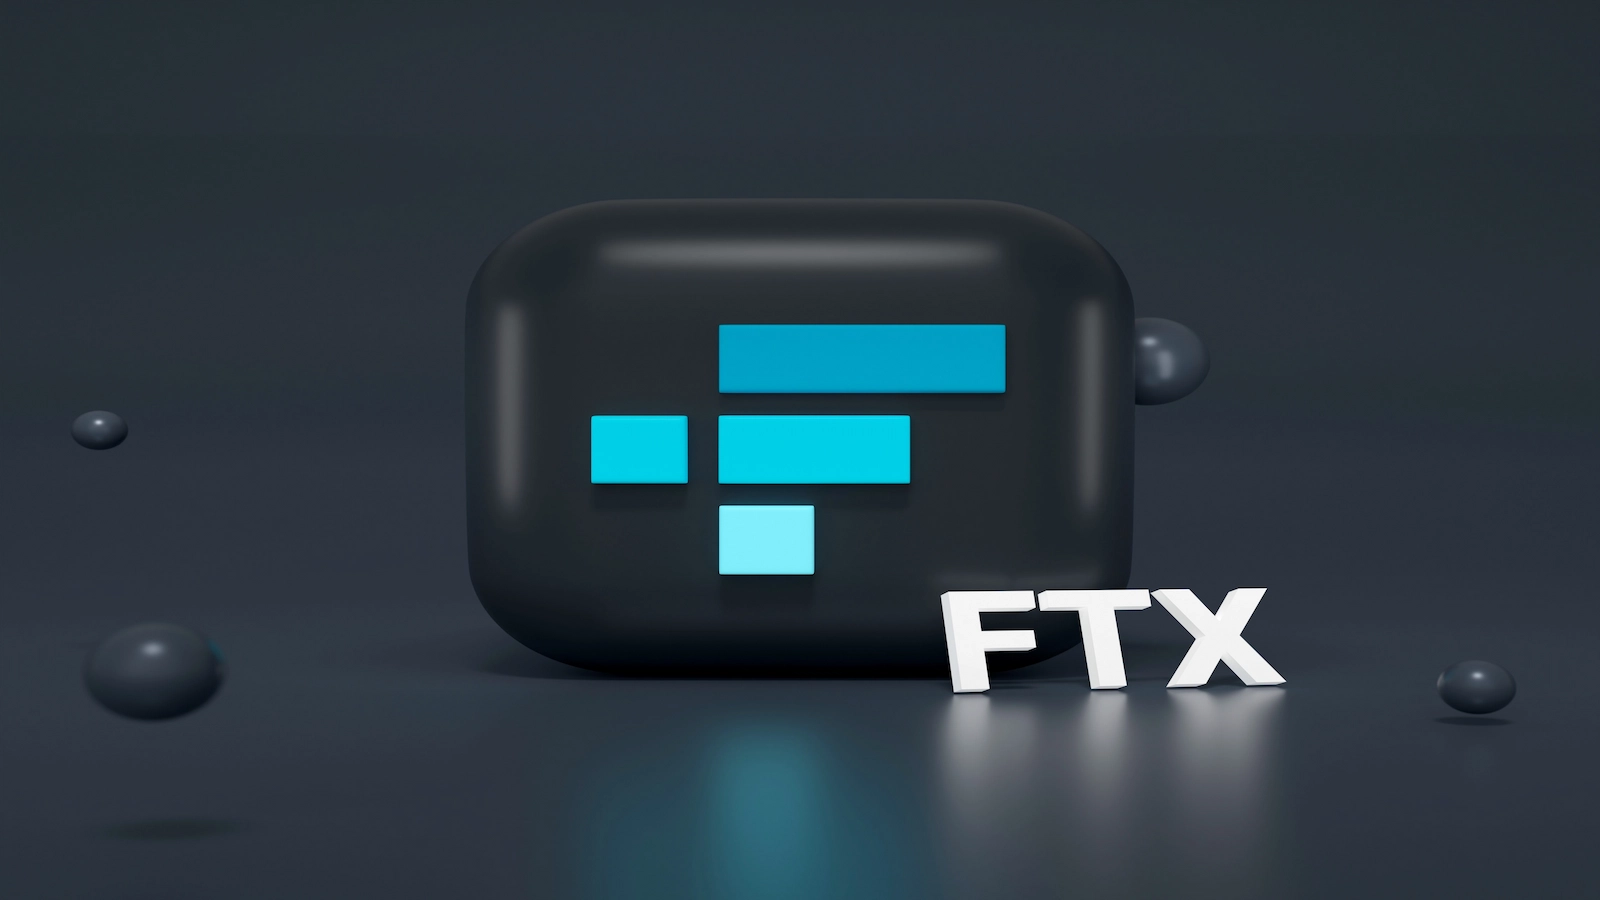 FTT price jumped over 33% as news of FTX revival plans hit the wires